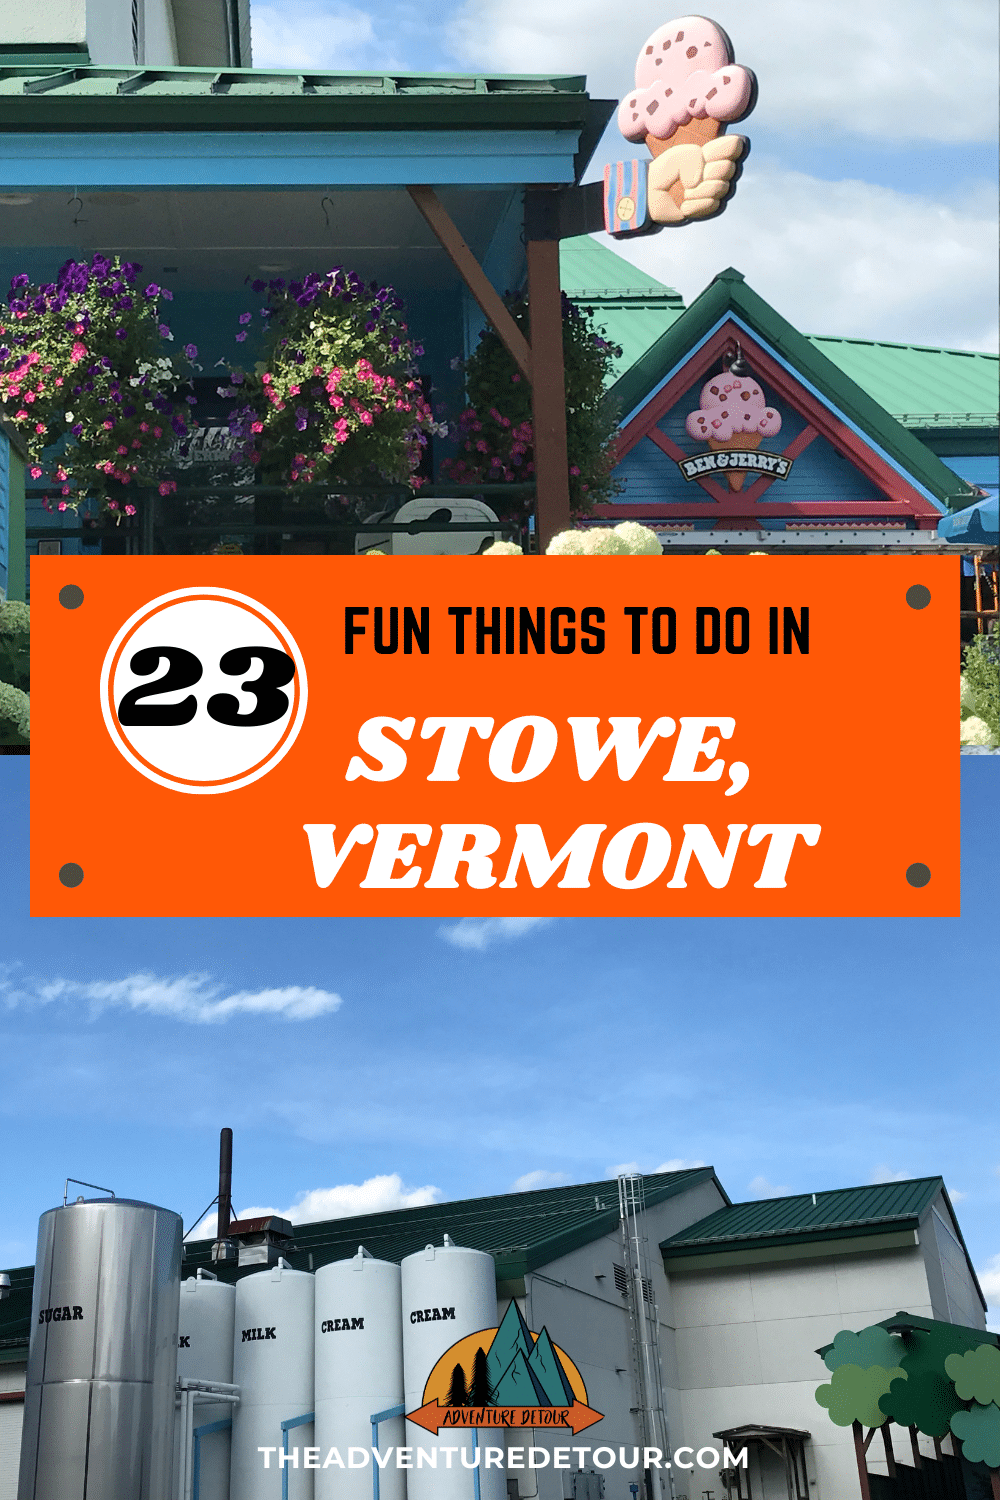 Ben and Jerry's Ice Cream Factory - Things To Do In Stowe Vermont In The Summer